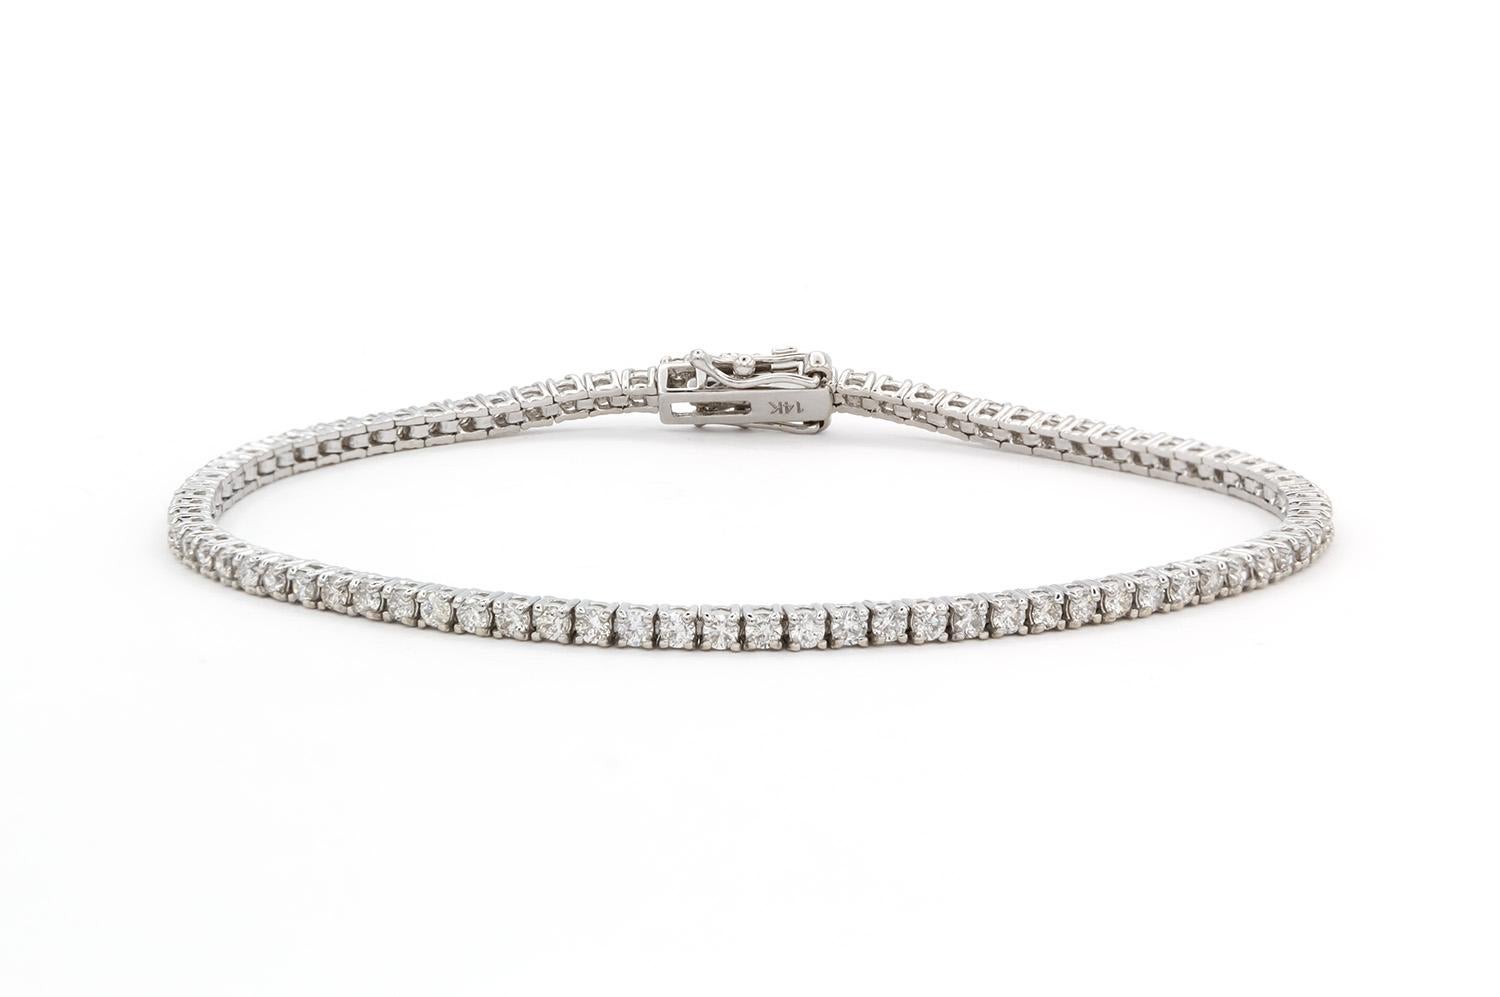 We are pleased to present this beautiful Brand New 14k White Gold & Diamond Tennis Bracelet. It features 2.06ctw G-H/VS2-SI1 Round Brilliant Cut Diamonds set in this 14k white gold tennis bracelet. The bracelet measures 7″ long and features a push